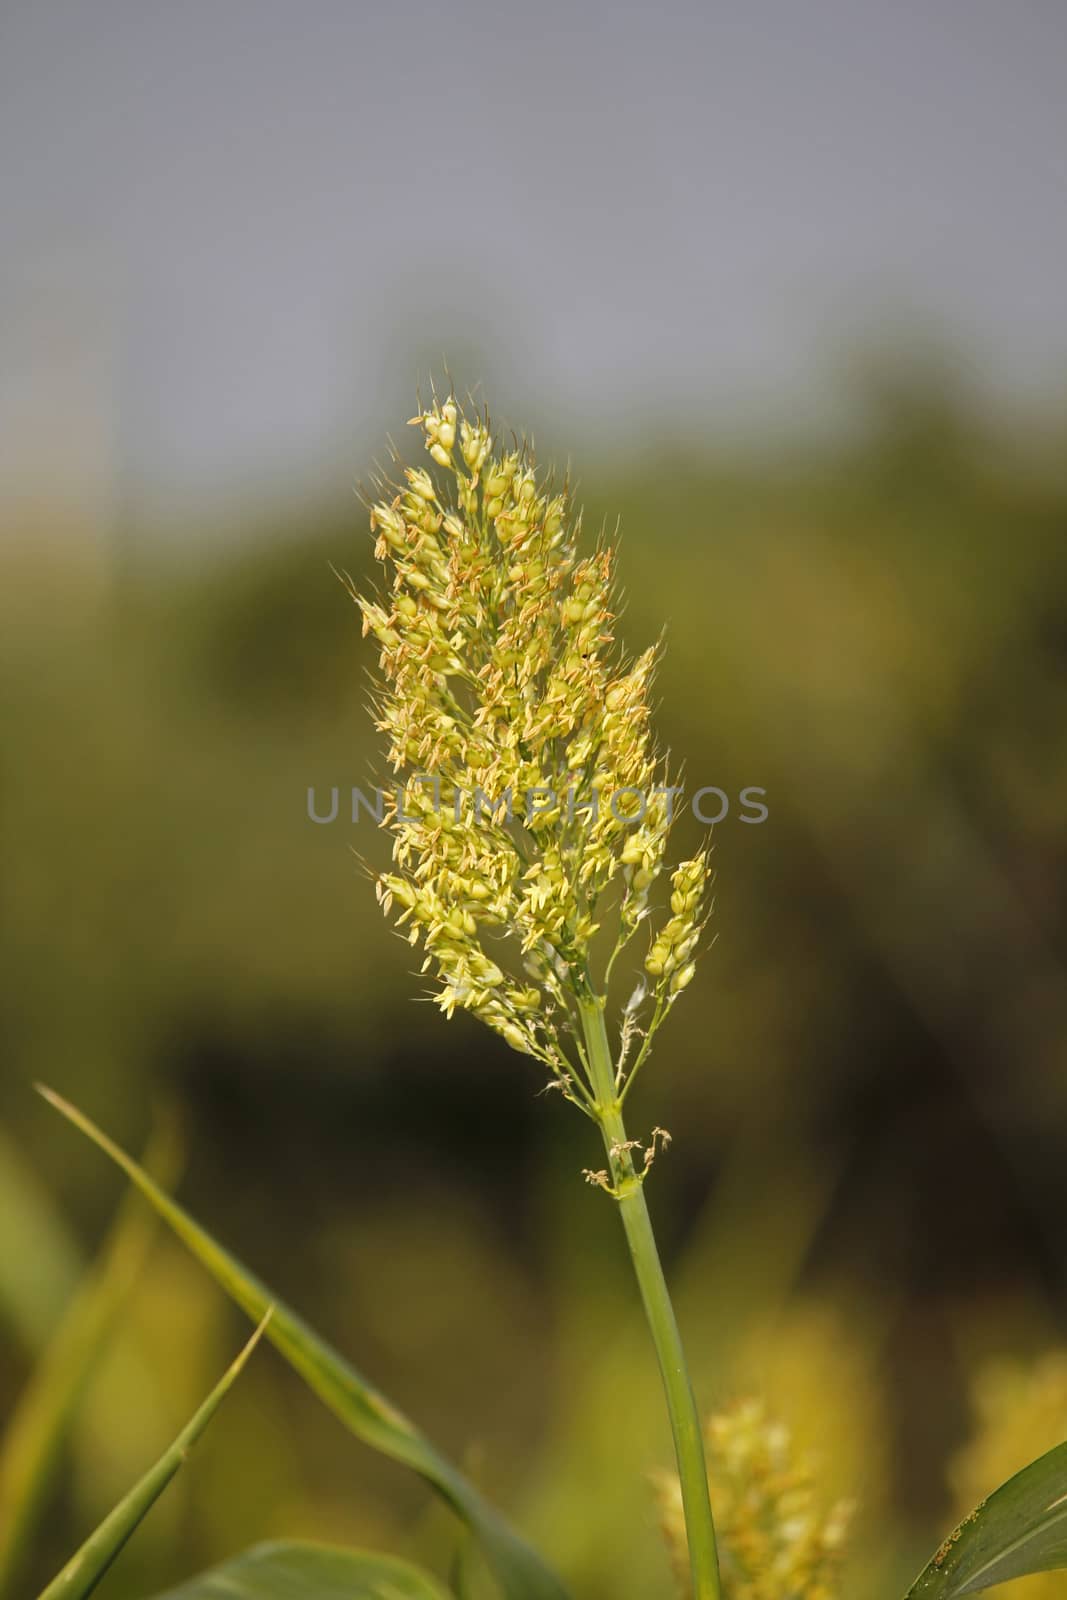 Sorghum bicolor, commonly called sorghum and also known as durra, jowari, or milo, is a grass species cultivated for its grain, which is used for food, both for animals and humans, and for ethanol production.